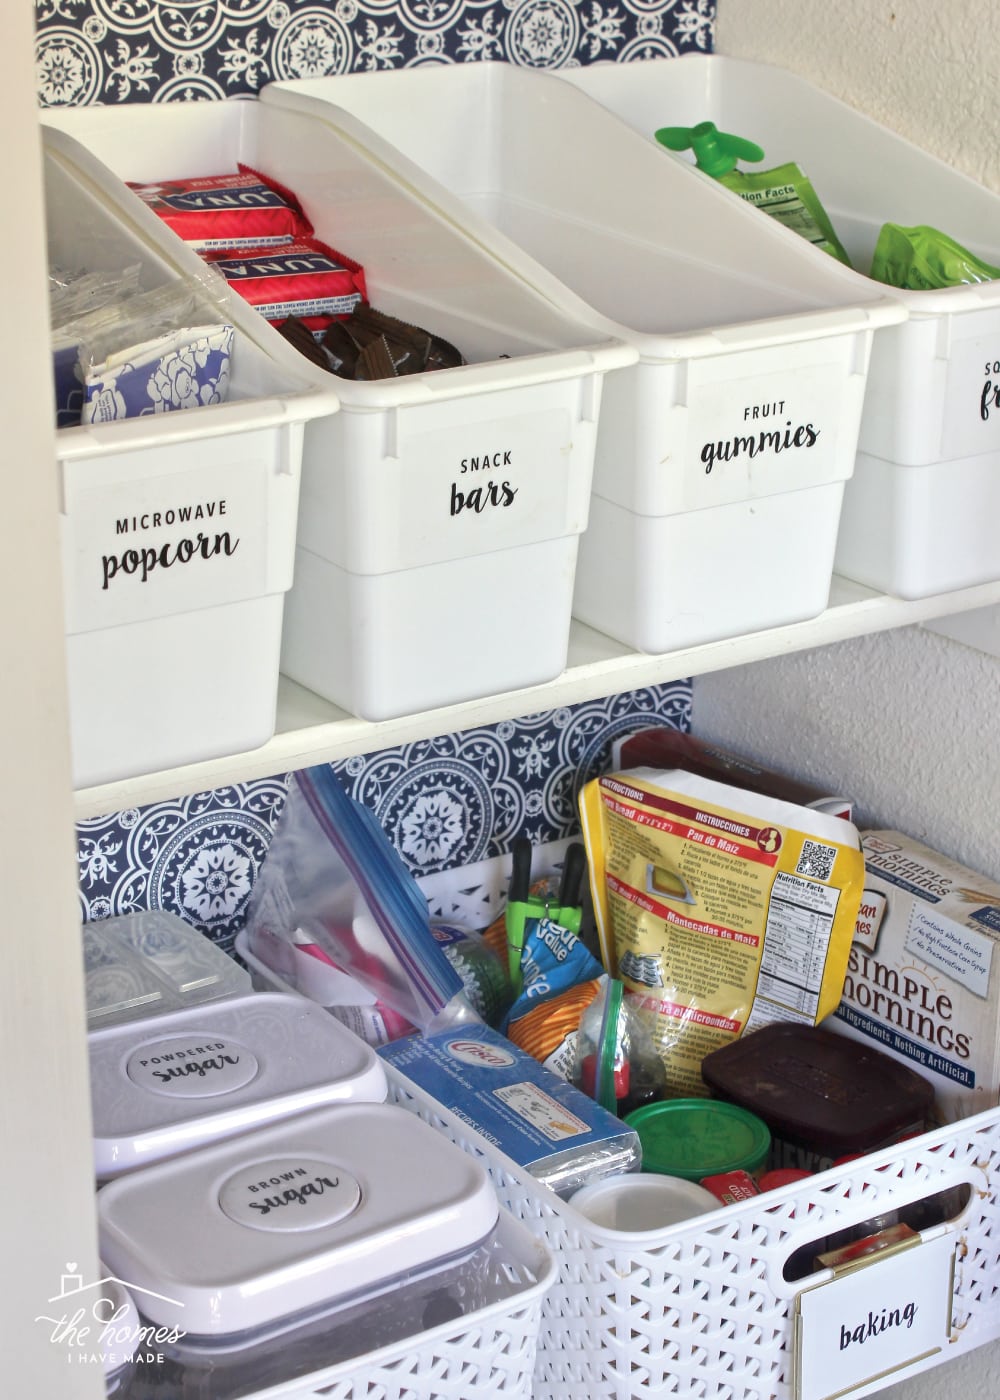 Take a tour of a perfectly organized pantry with all sorts of unique and smart food storage solutions!